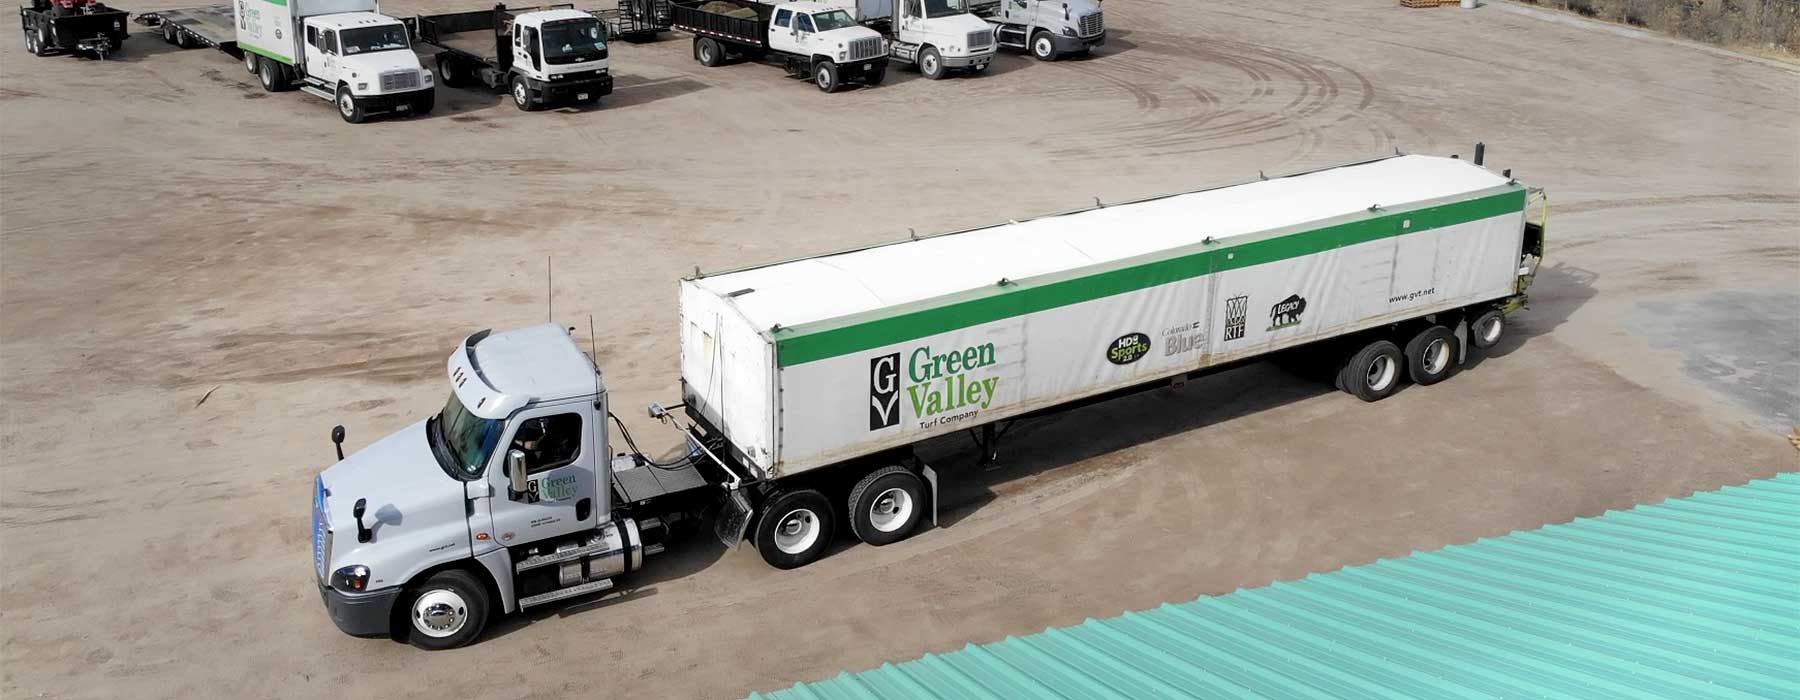 A Green Valley Turf Co. tractor trailer unloads in Littleton, Colorado.